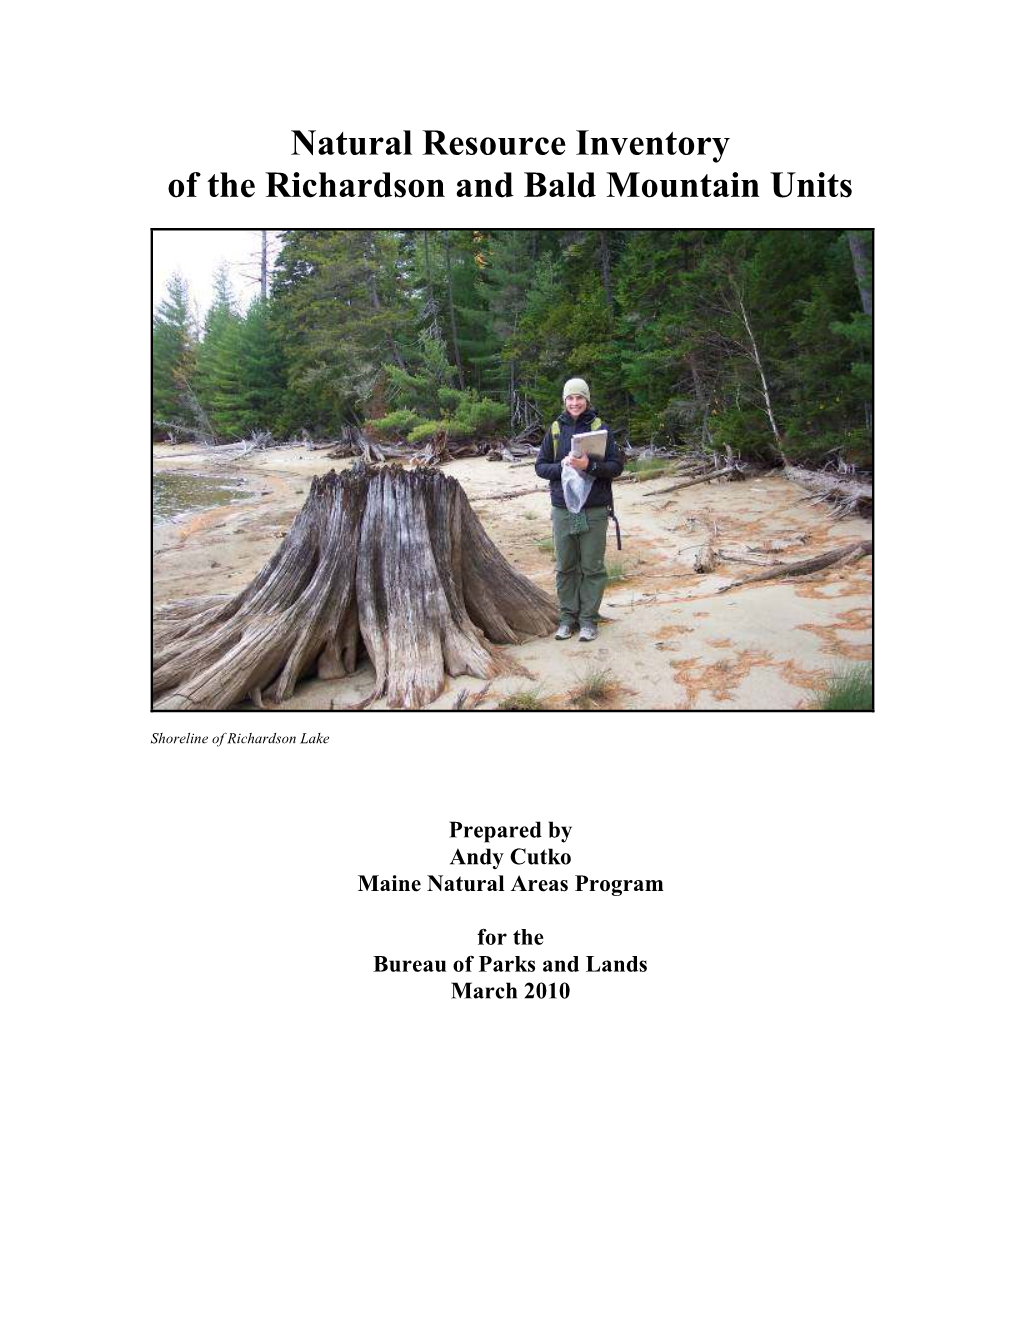 Natural Resource Inventory of the Richardson and Bald Mountain Units